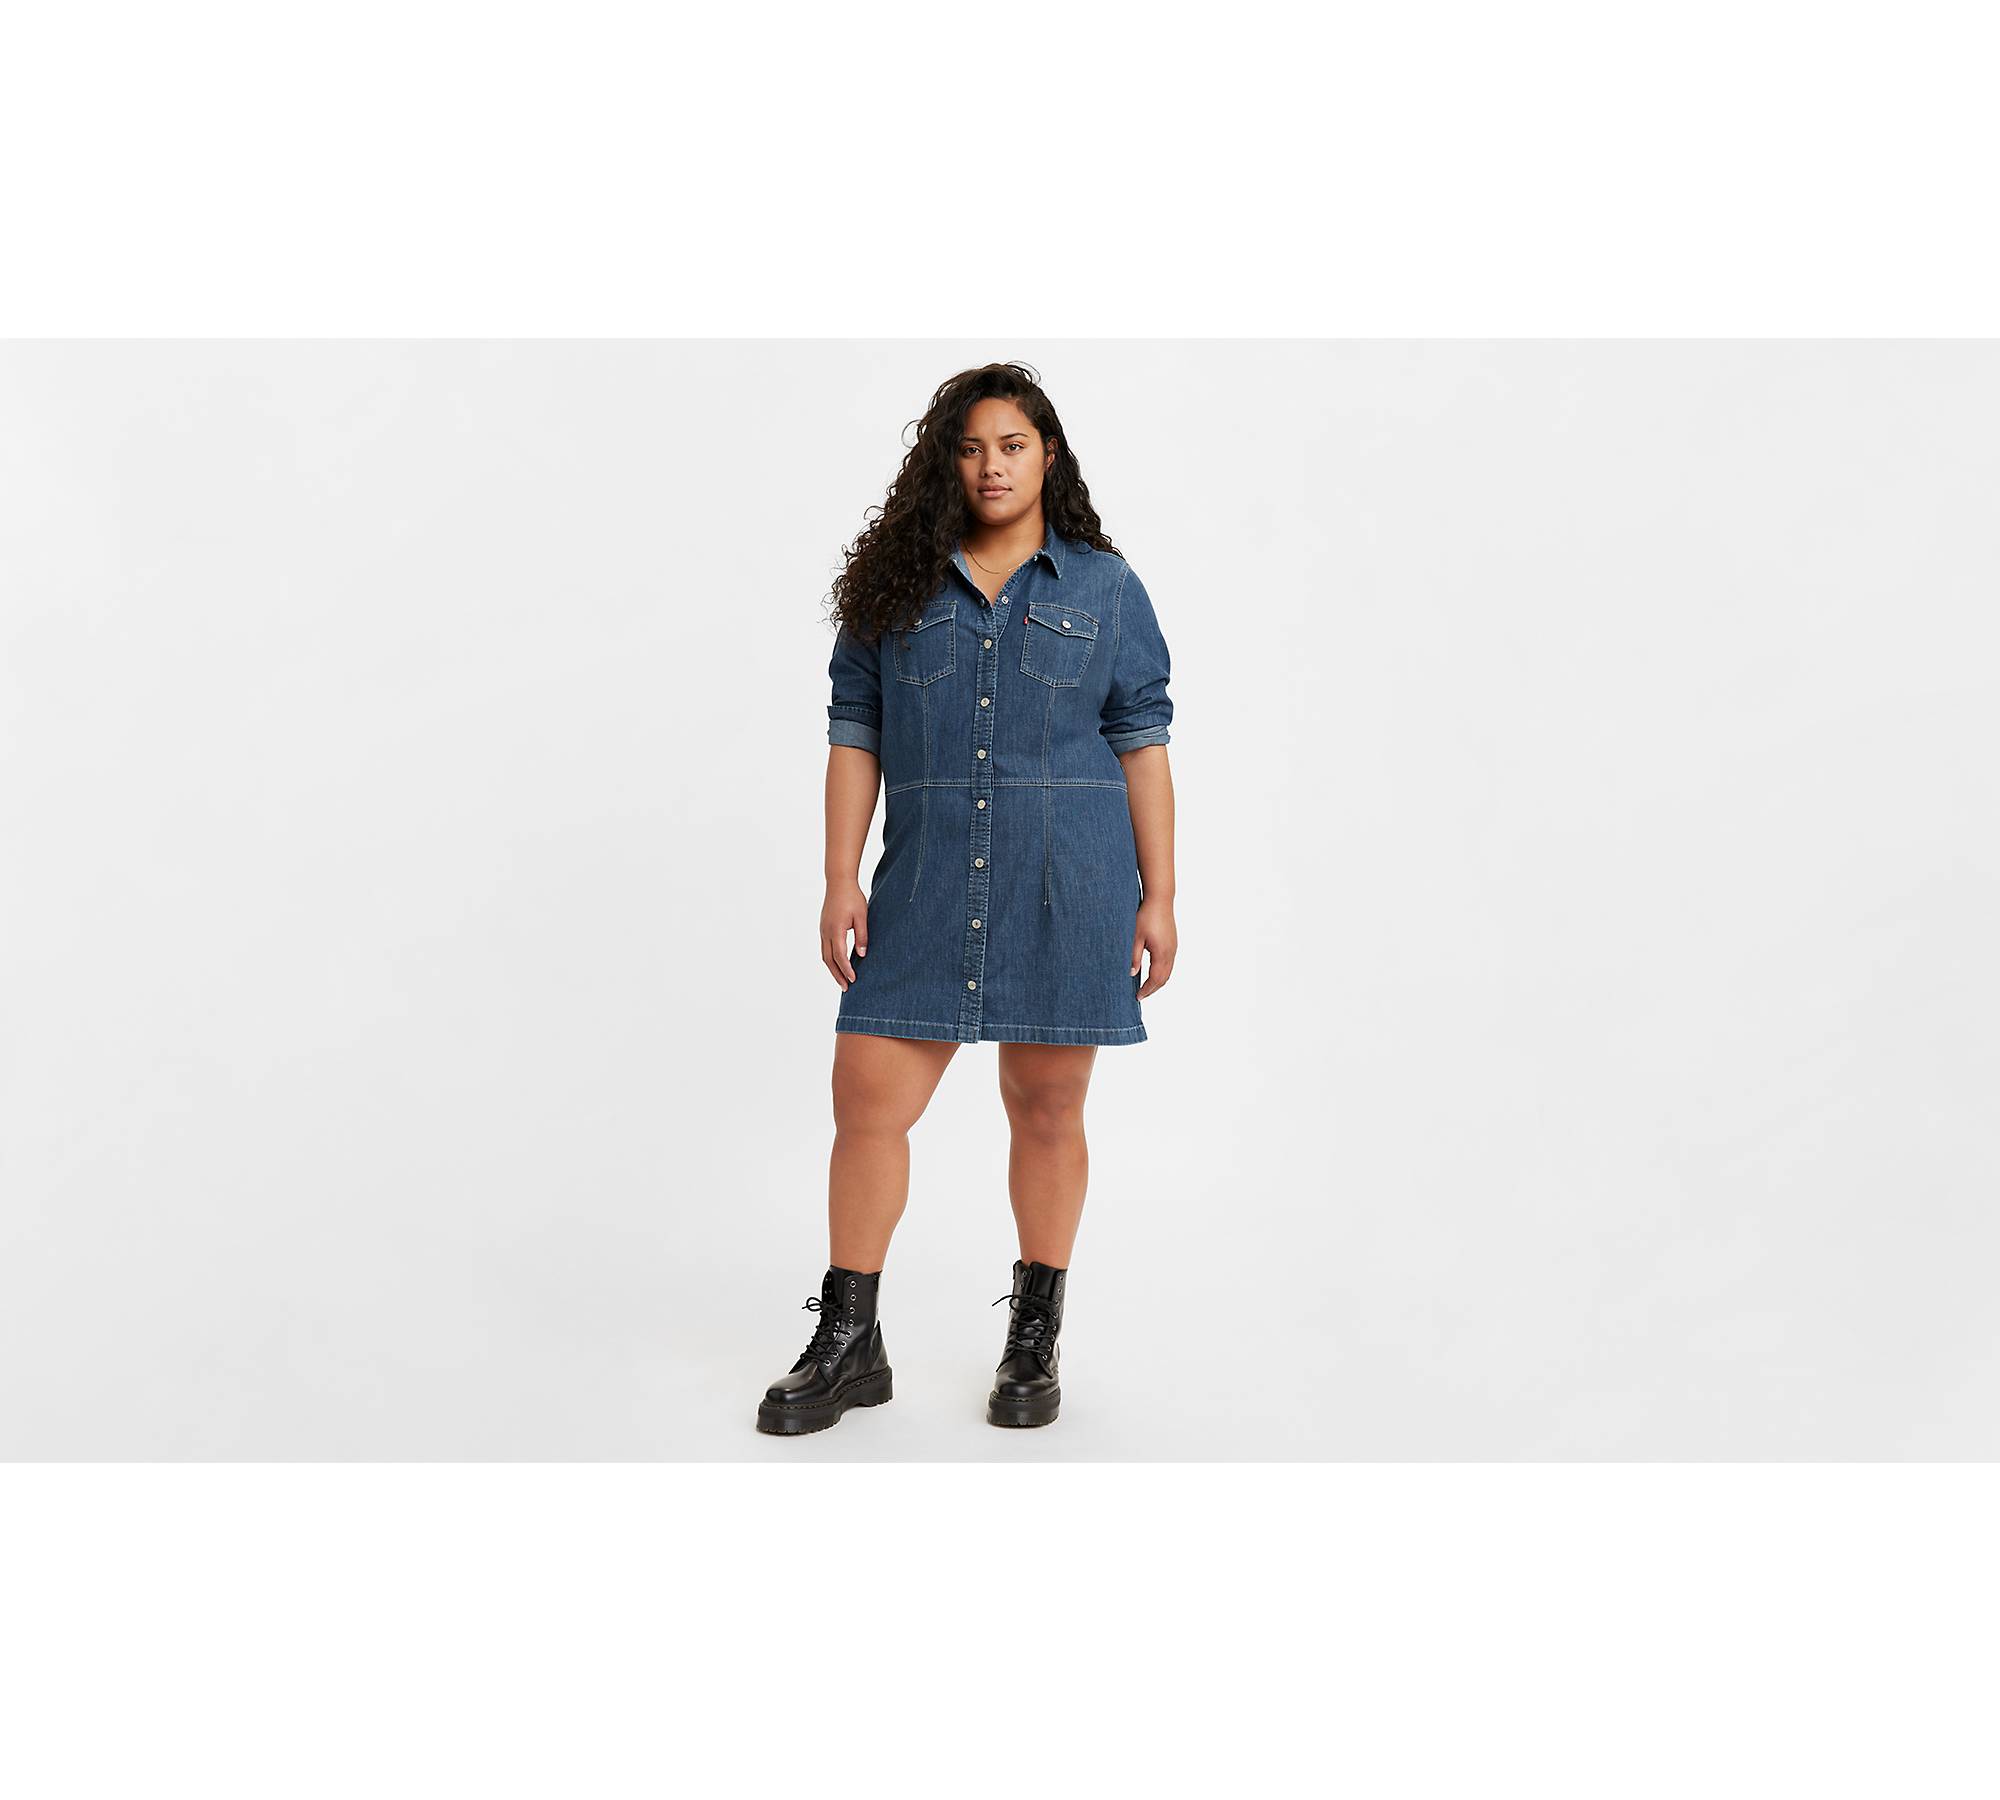 Chic long blue jean dress plus size In A Variety Of Stylish